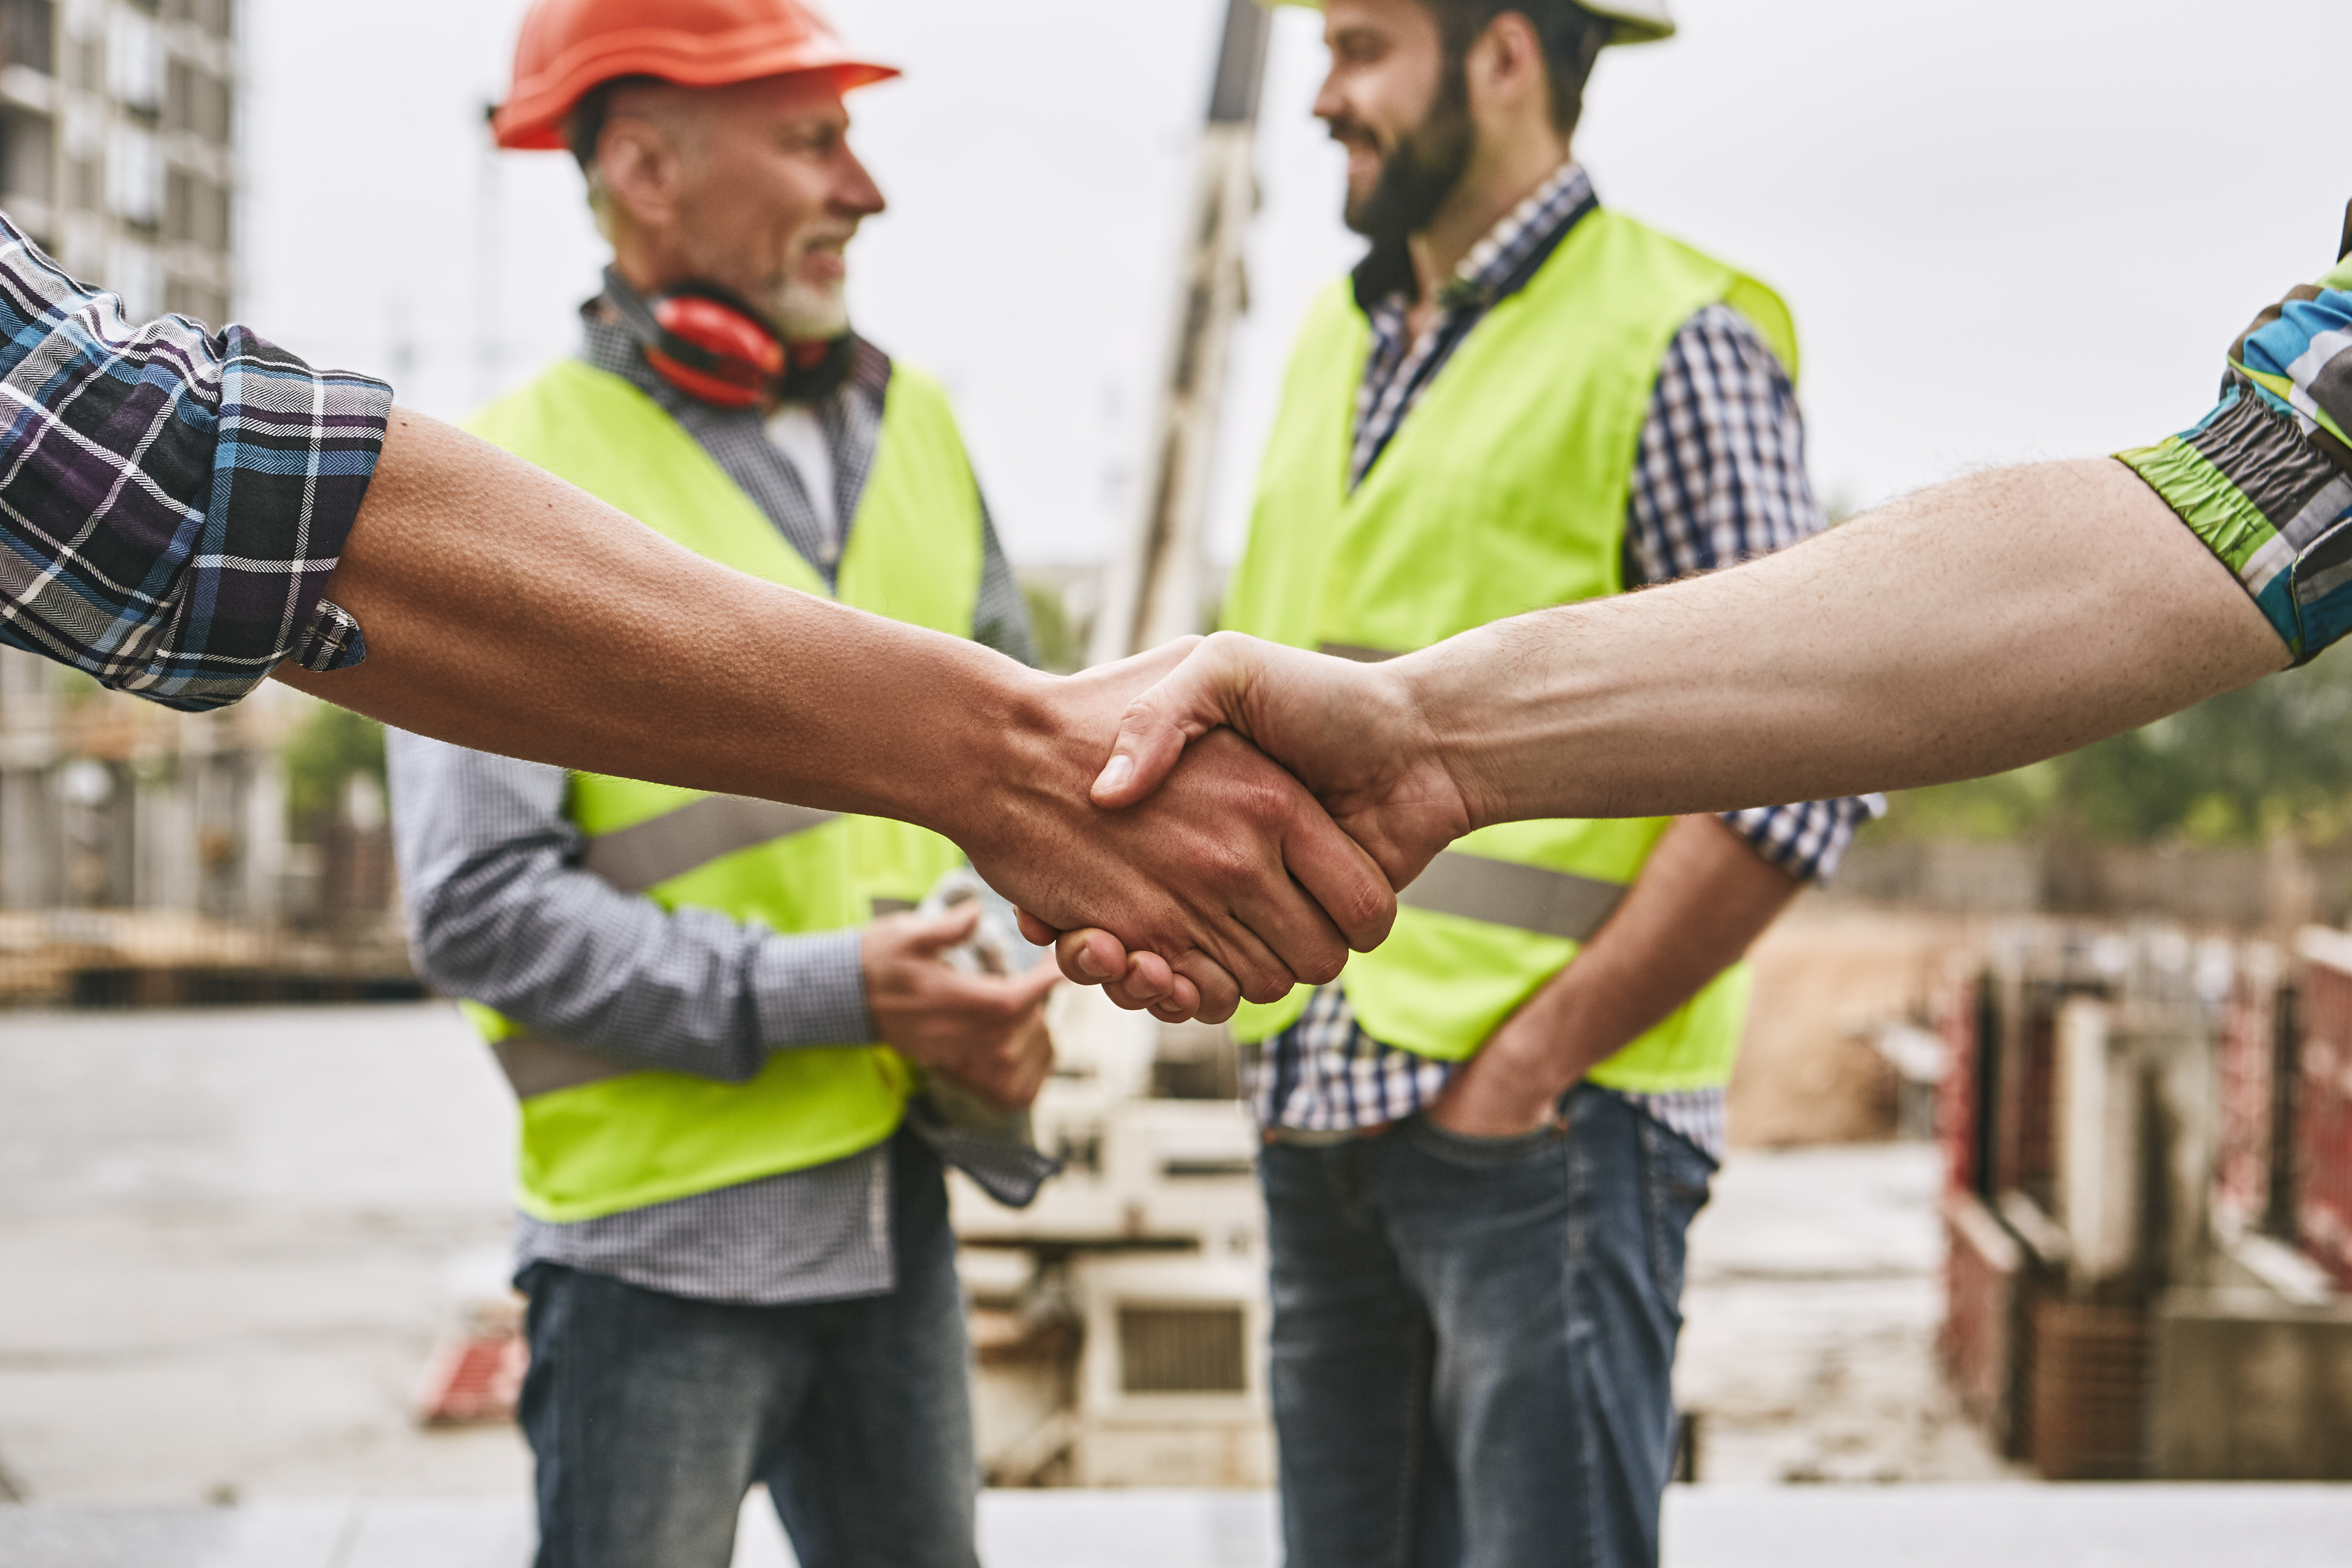 We did it! Close up photo of builders shaking hands against cheerful colleagues while working together at construction site. Team work.